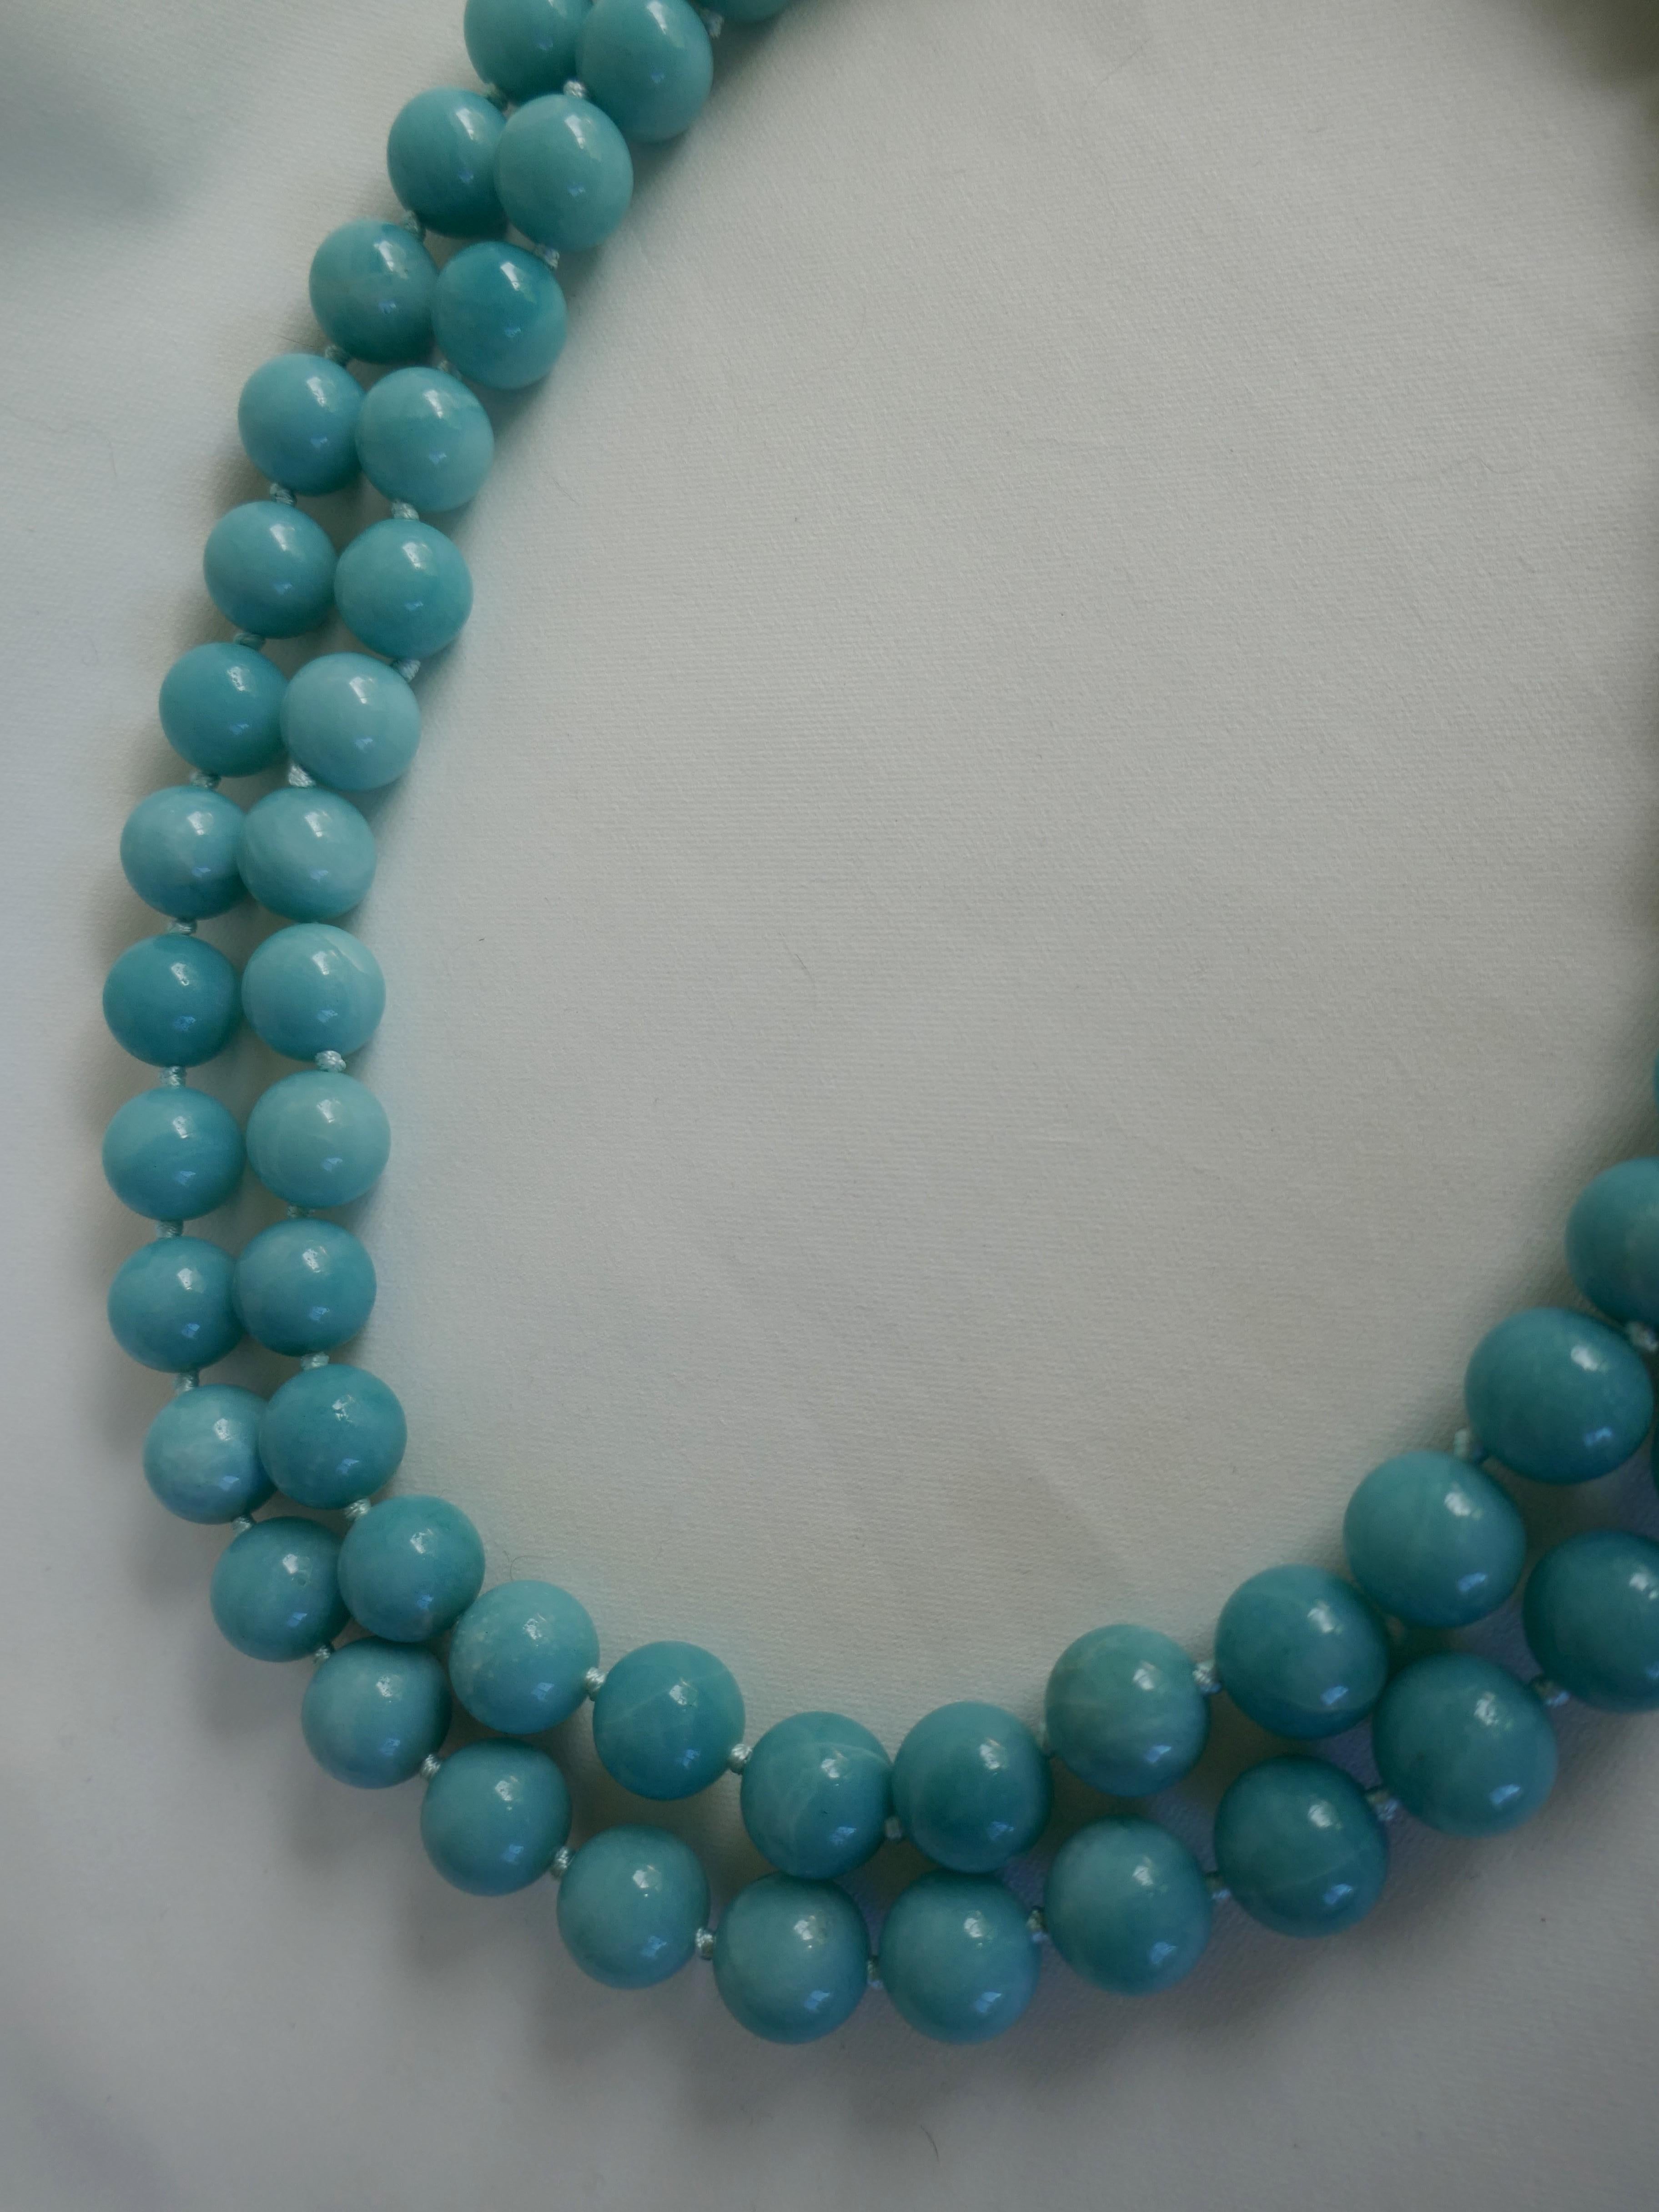 Two Strand Amazonite (turquoise color) 925 Sterling Silver Gemstone Necklace For Sale 3